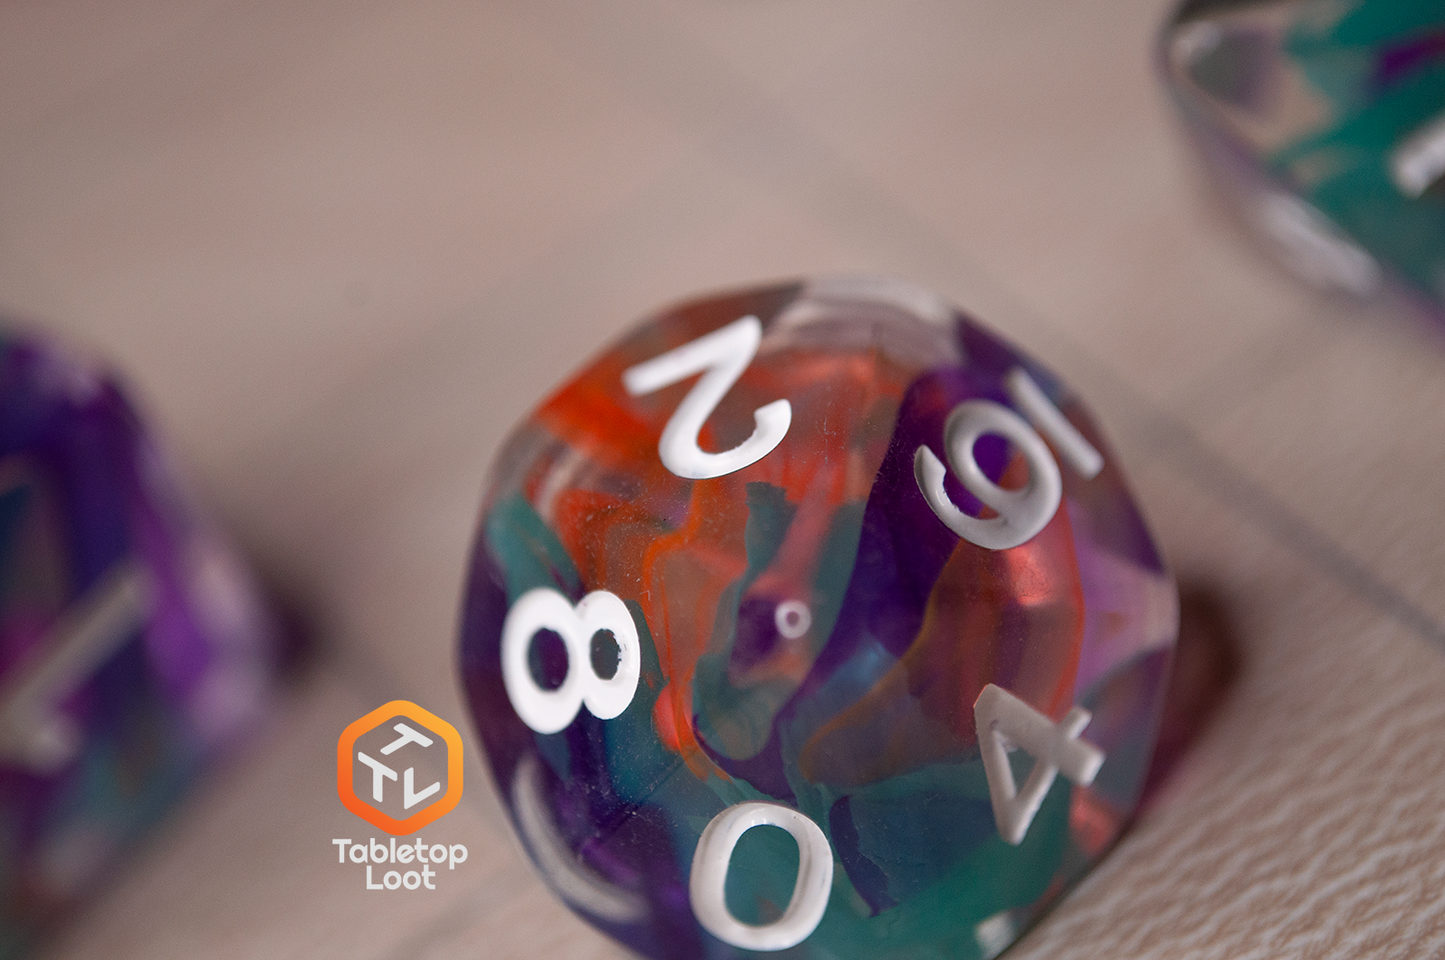 A close up of the Raise the Banners D10 with orange, blue, and purple ribbons of color swirled inside clear resin.